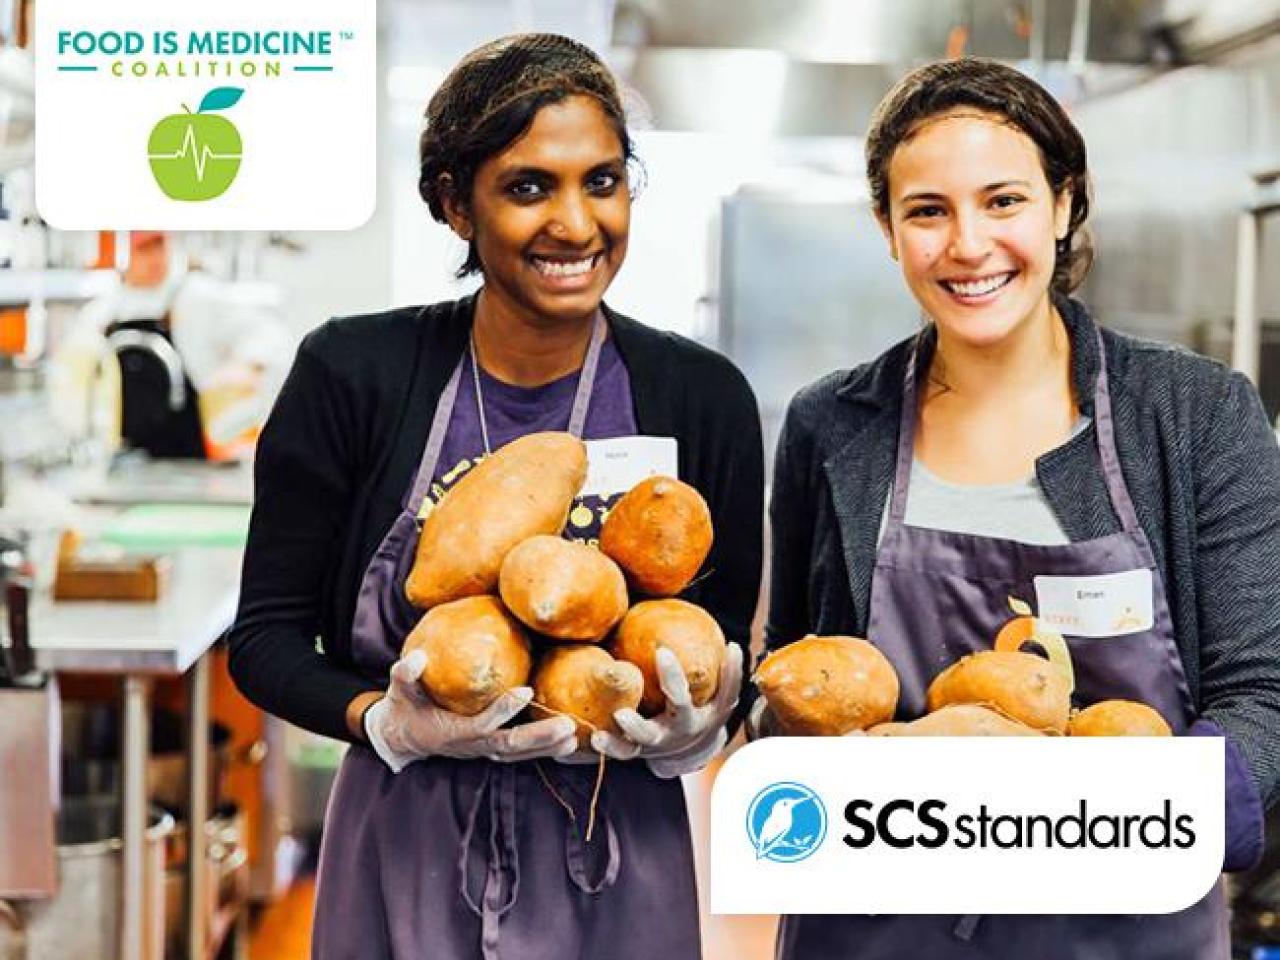 How the Food Is Medicine Coalition Established a Comprehensive, Industry Accreditation Program